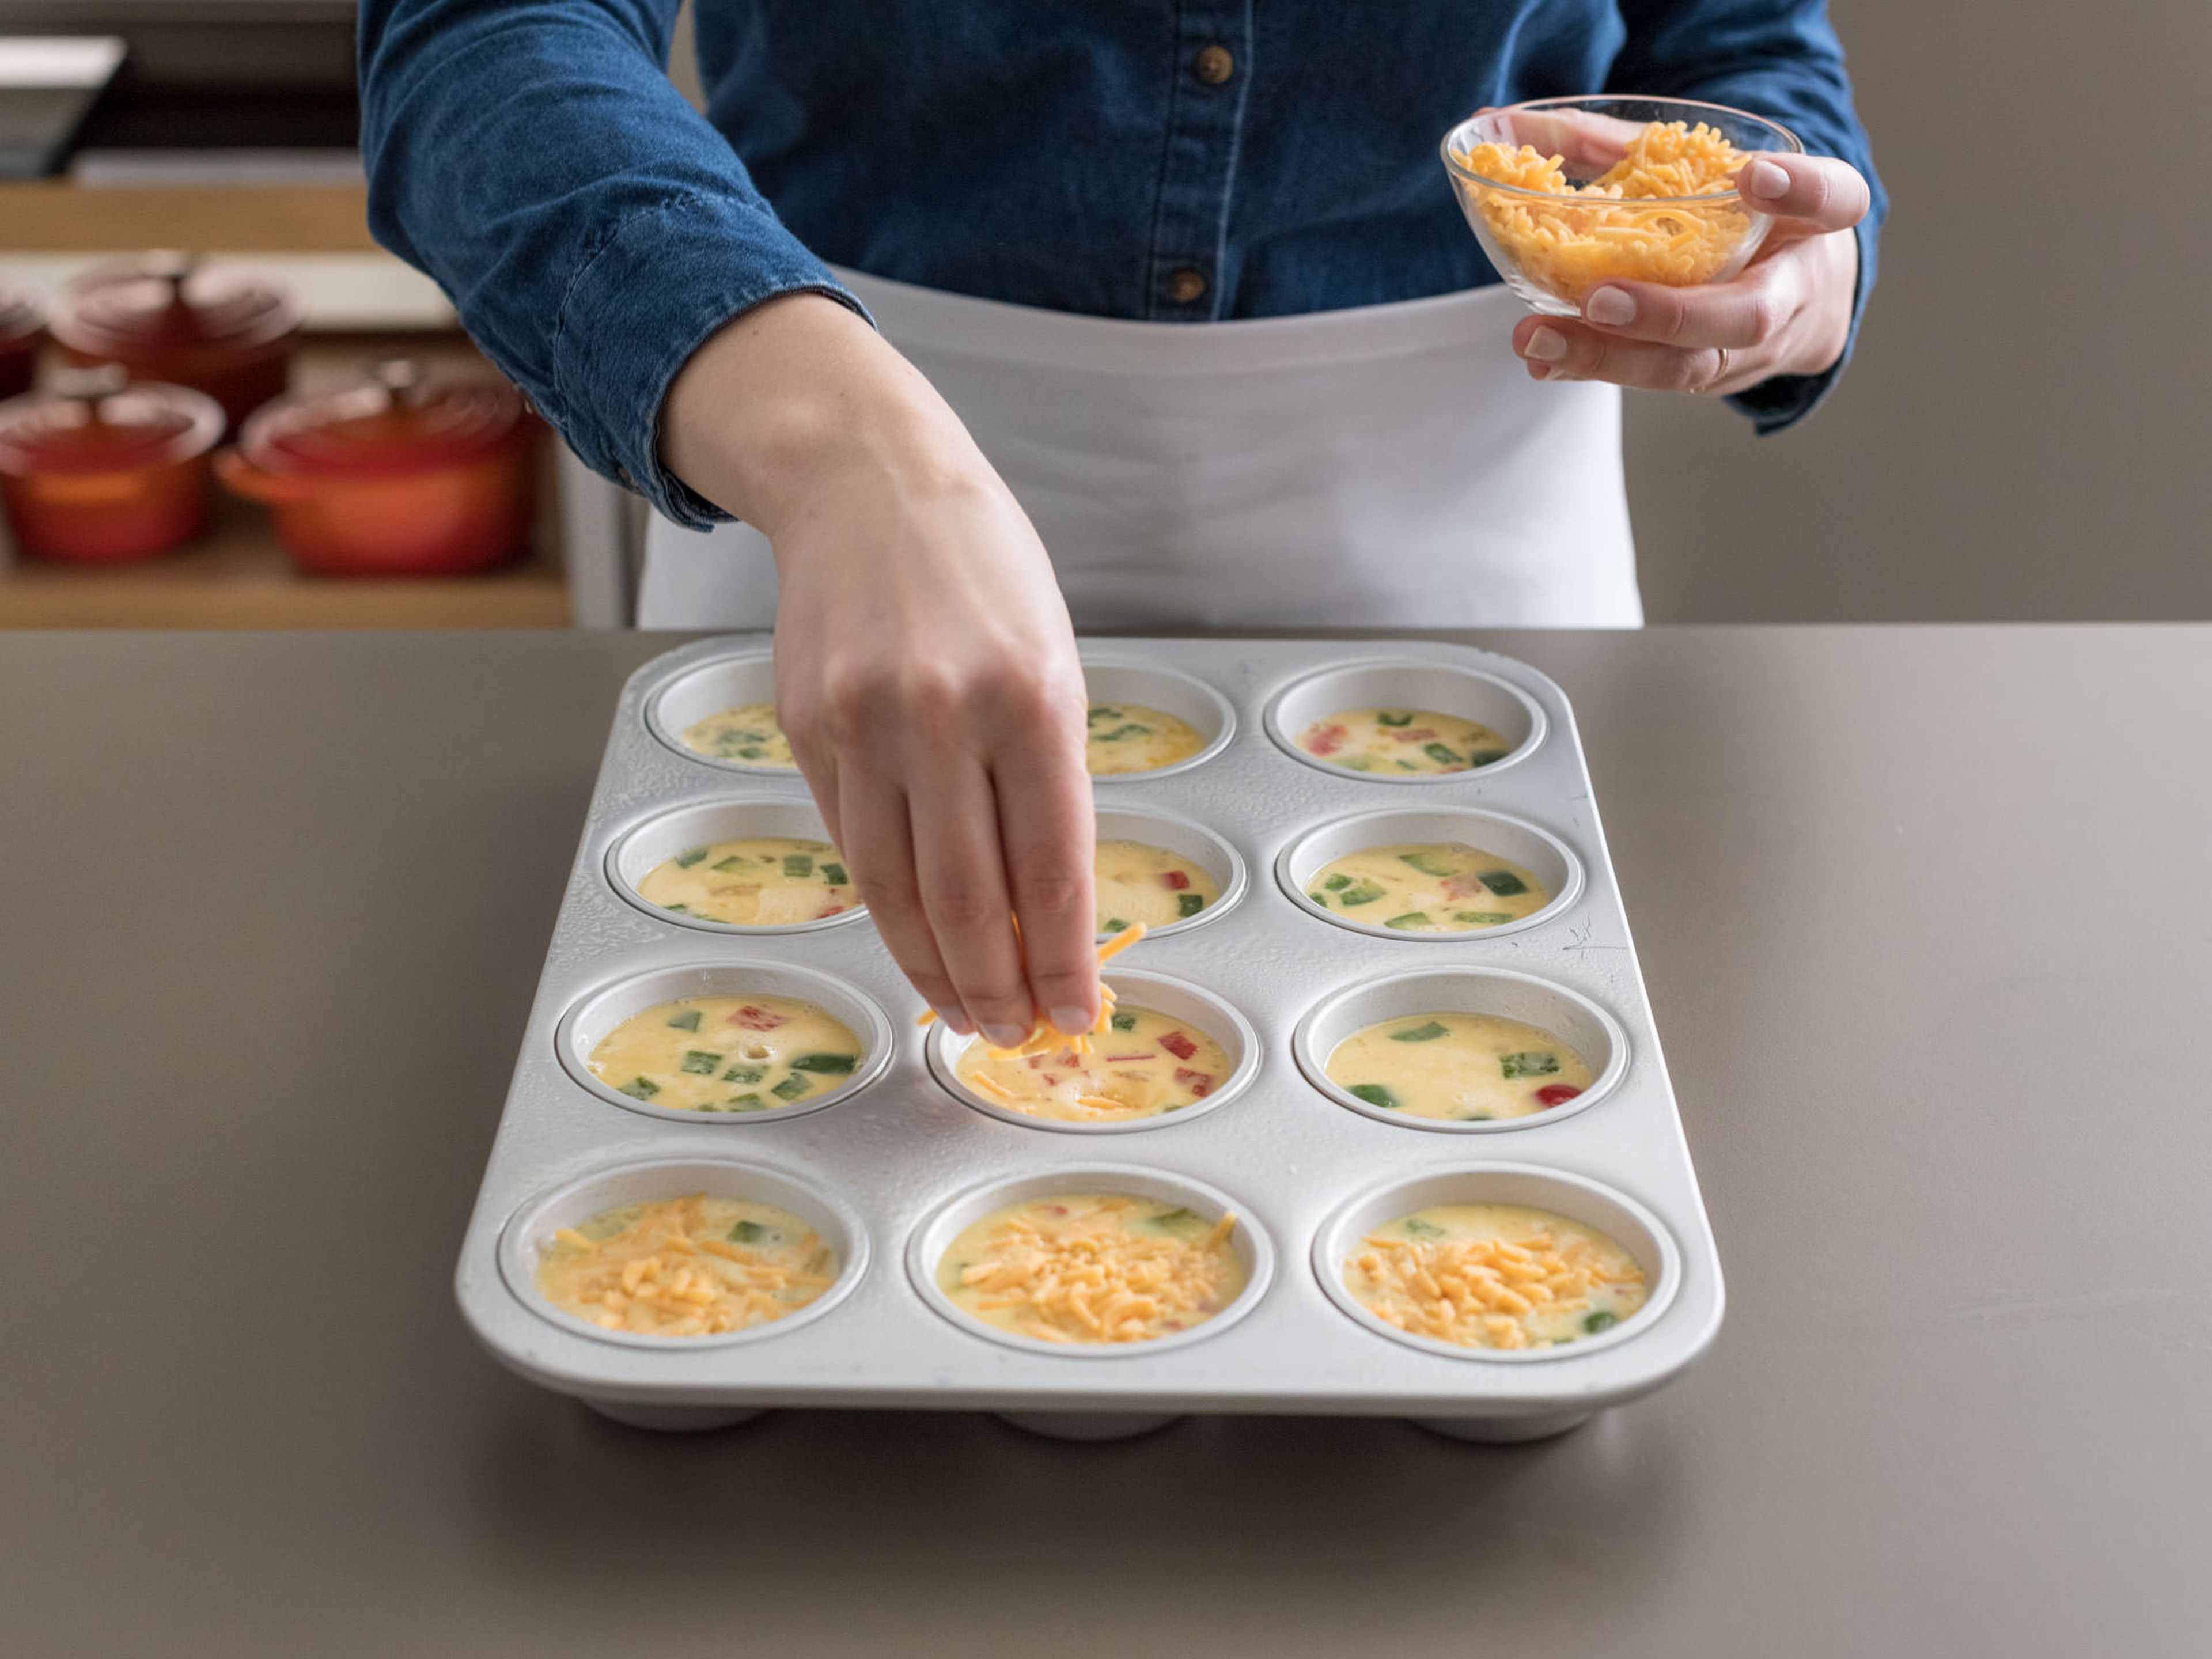 Pour egg mixture into cups, filling each three-quarters of the way full. Sprinkle with cheese.